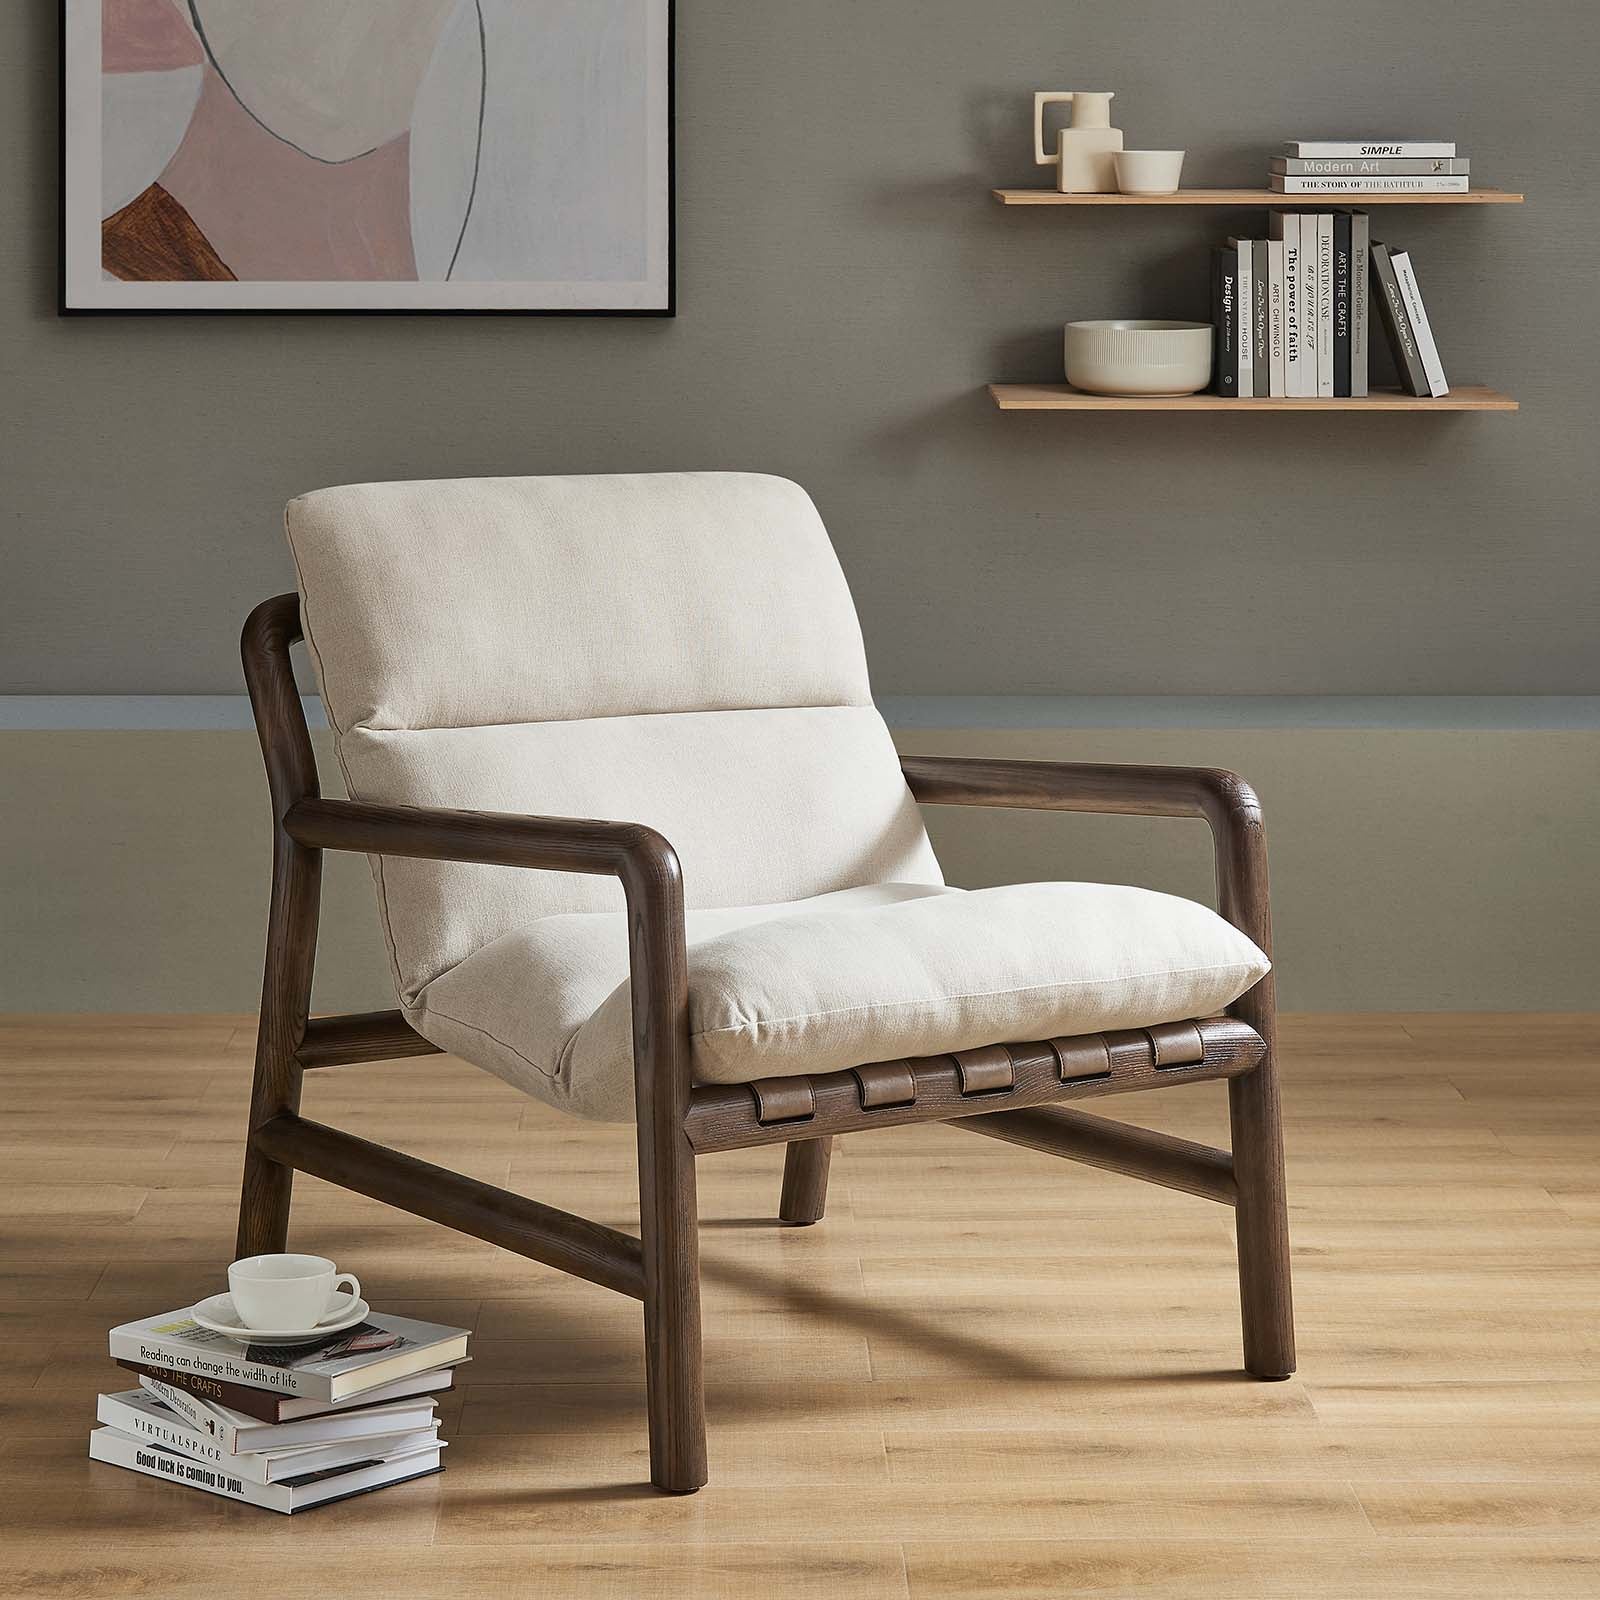 Paxton Wood Sling Chair - East Shore Modern Home Furnishings